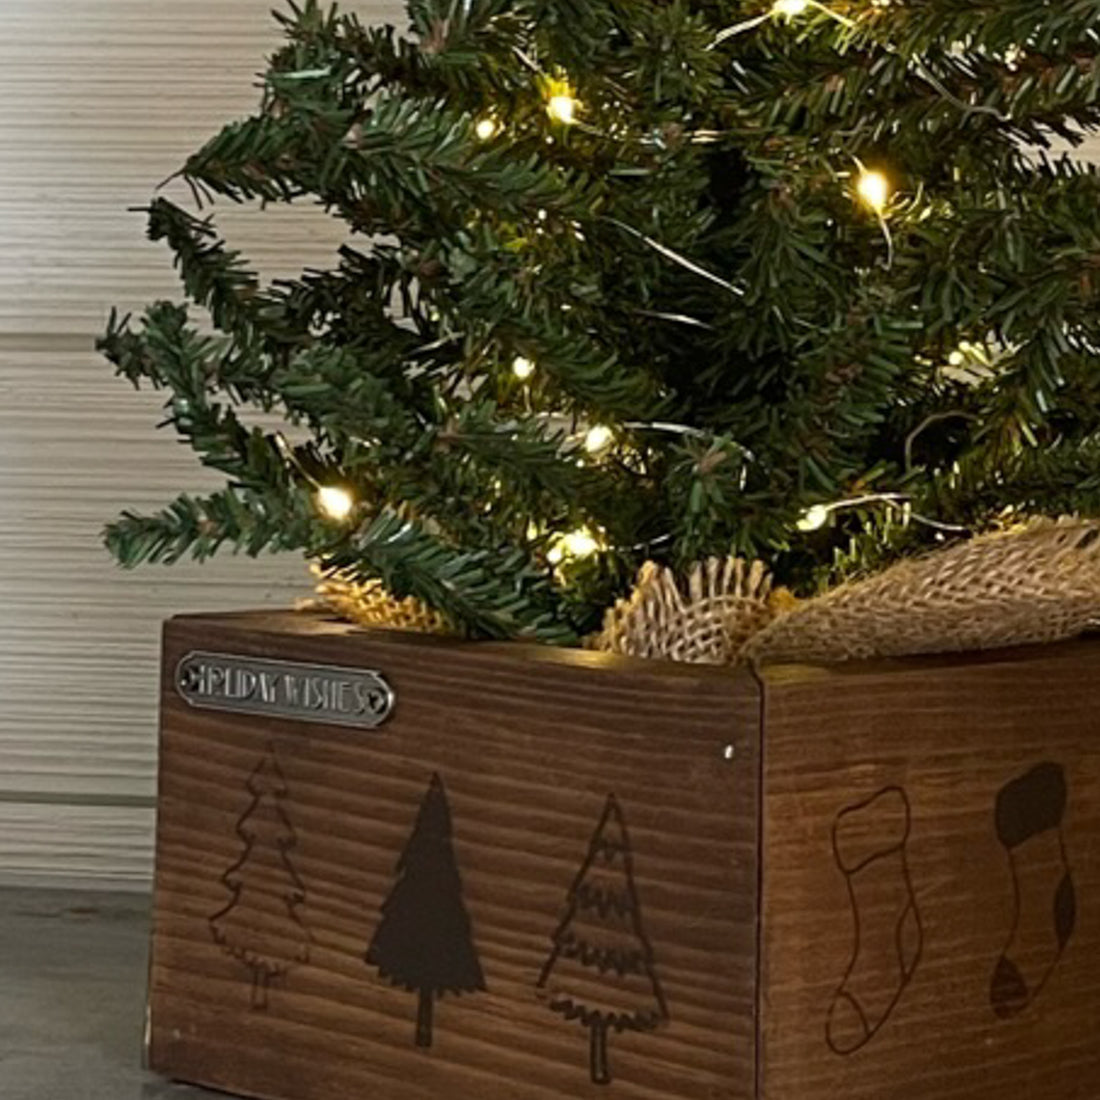 rustic brick-mold inspired wood box with christmas tree | wood-burned